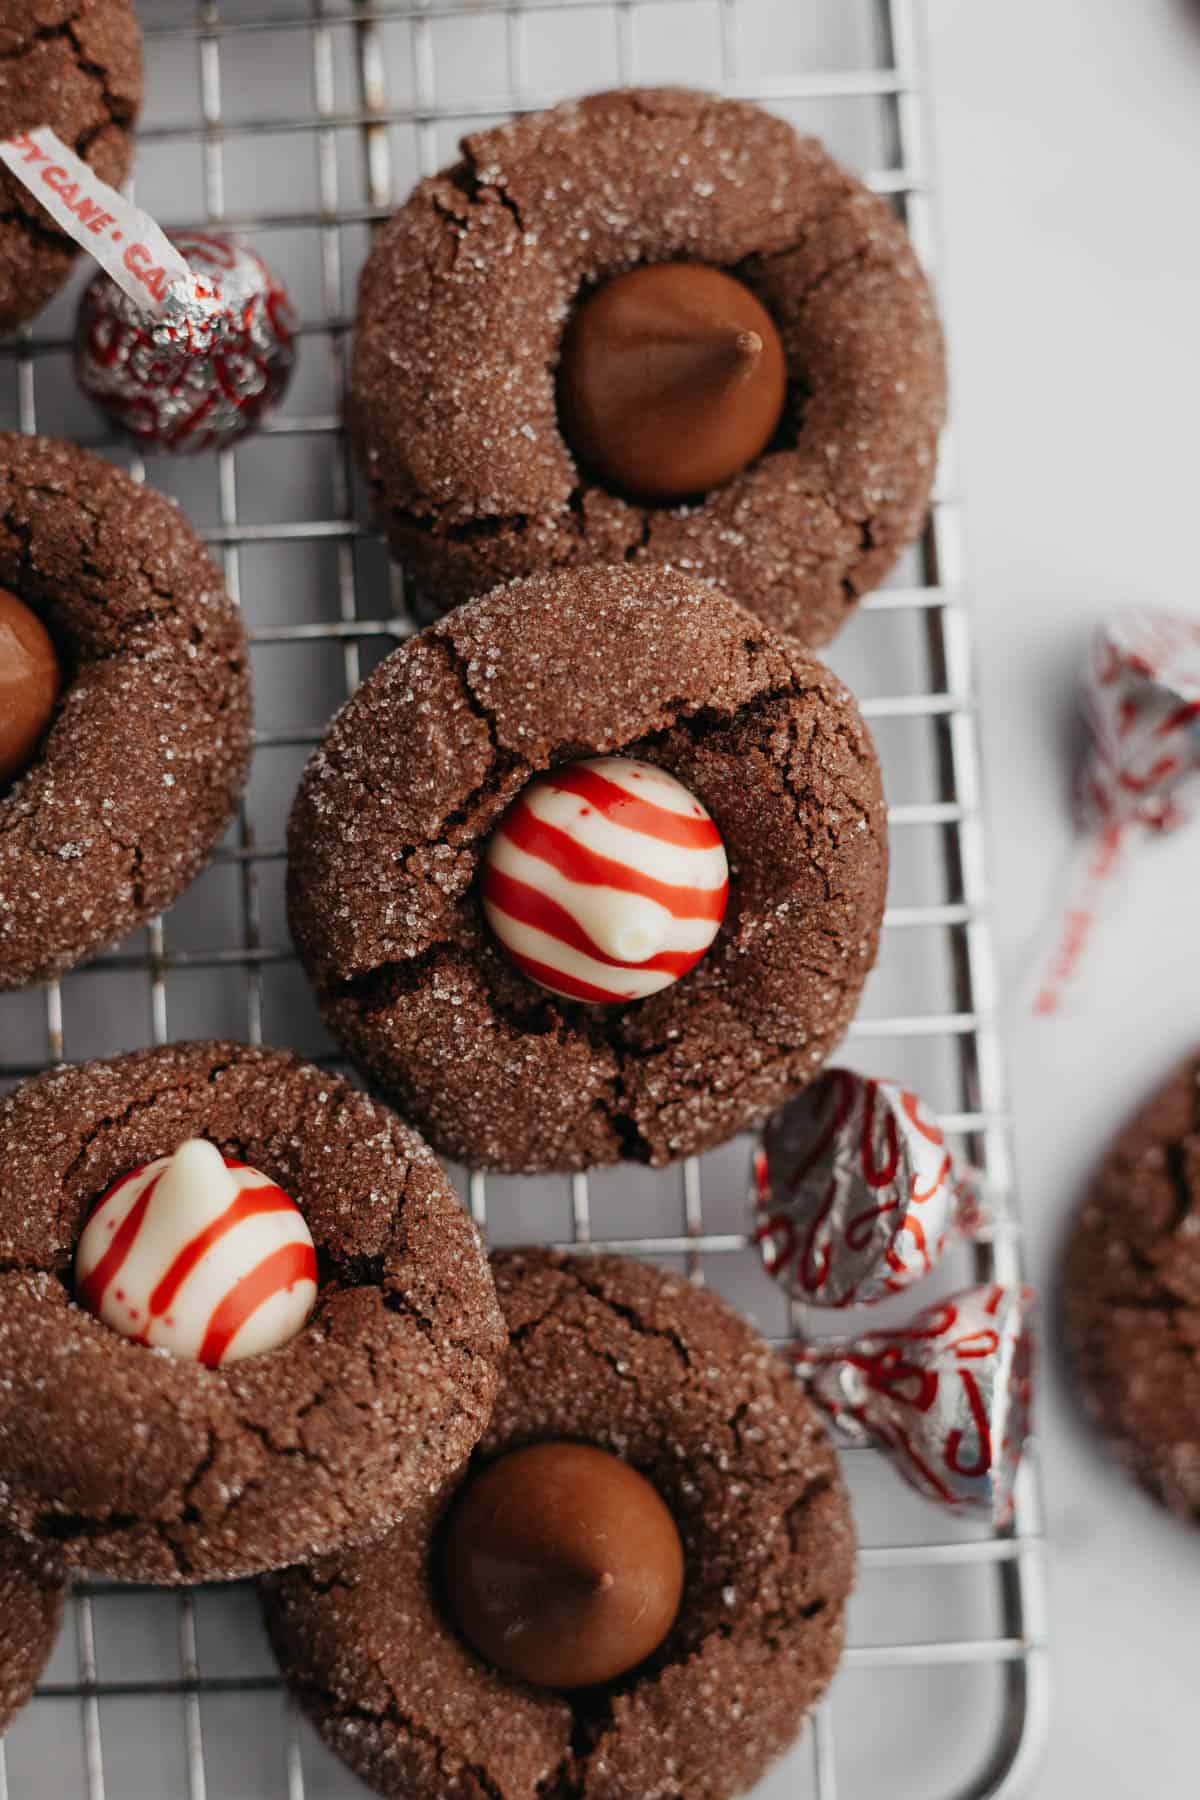 Chocolate thumbprint cookies with a chocolate kiss or candy cane kiss in the middle.